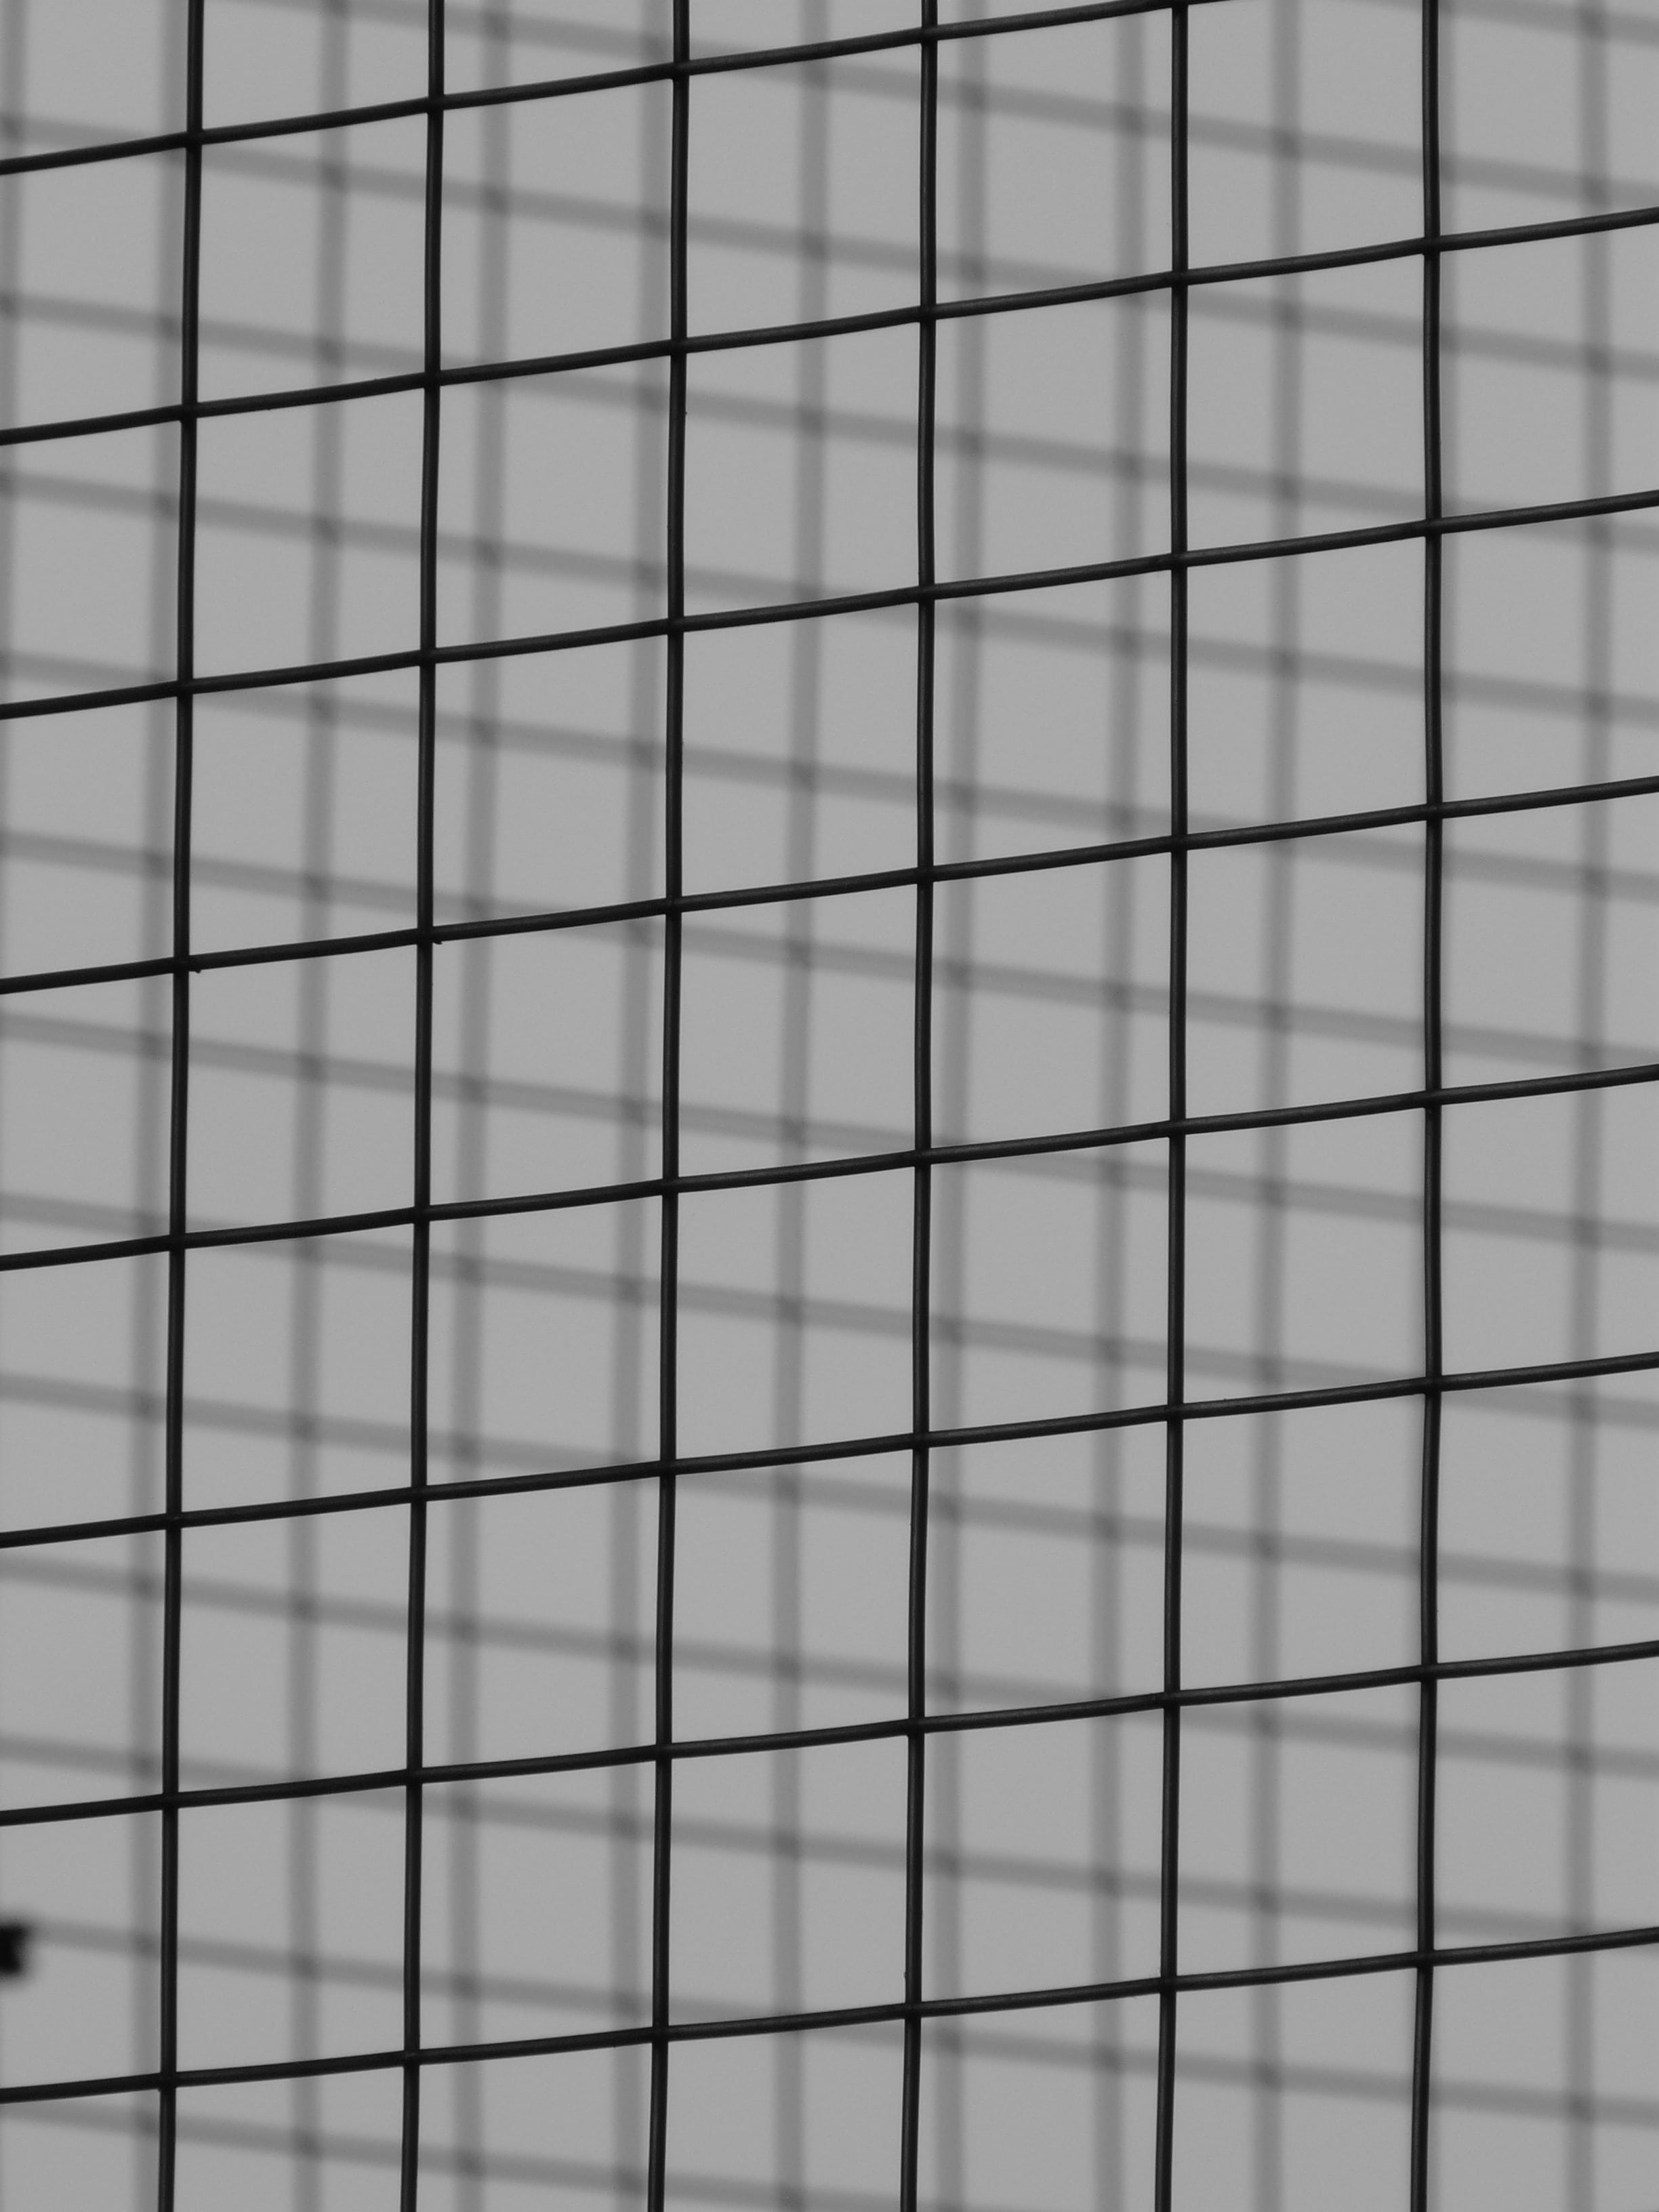 grid, steel grid, metal, wire, black and white, architecture